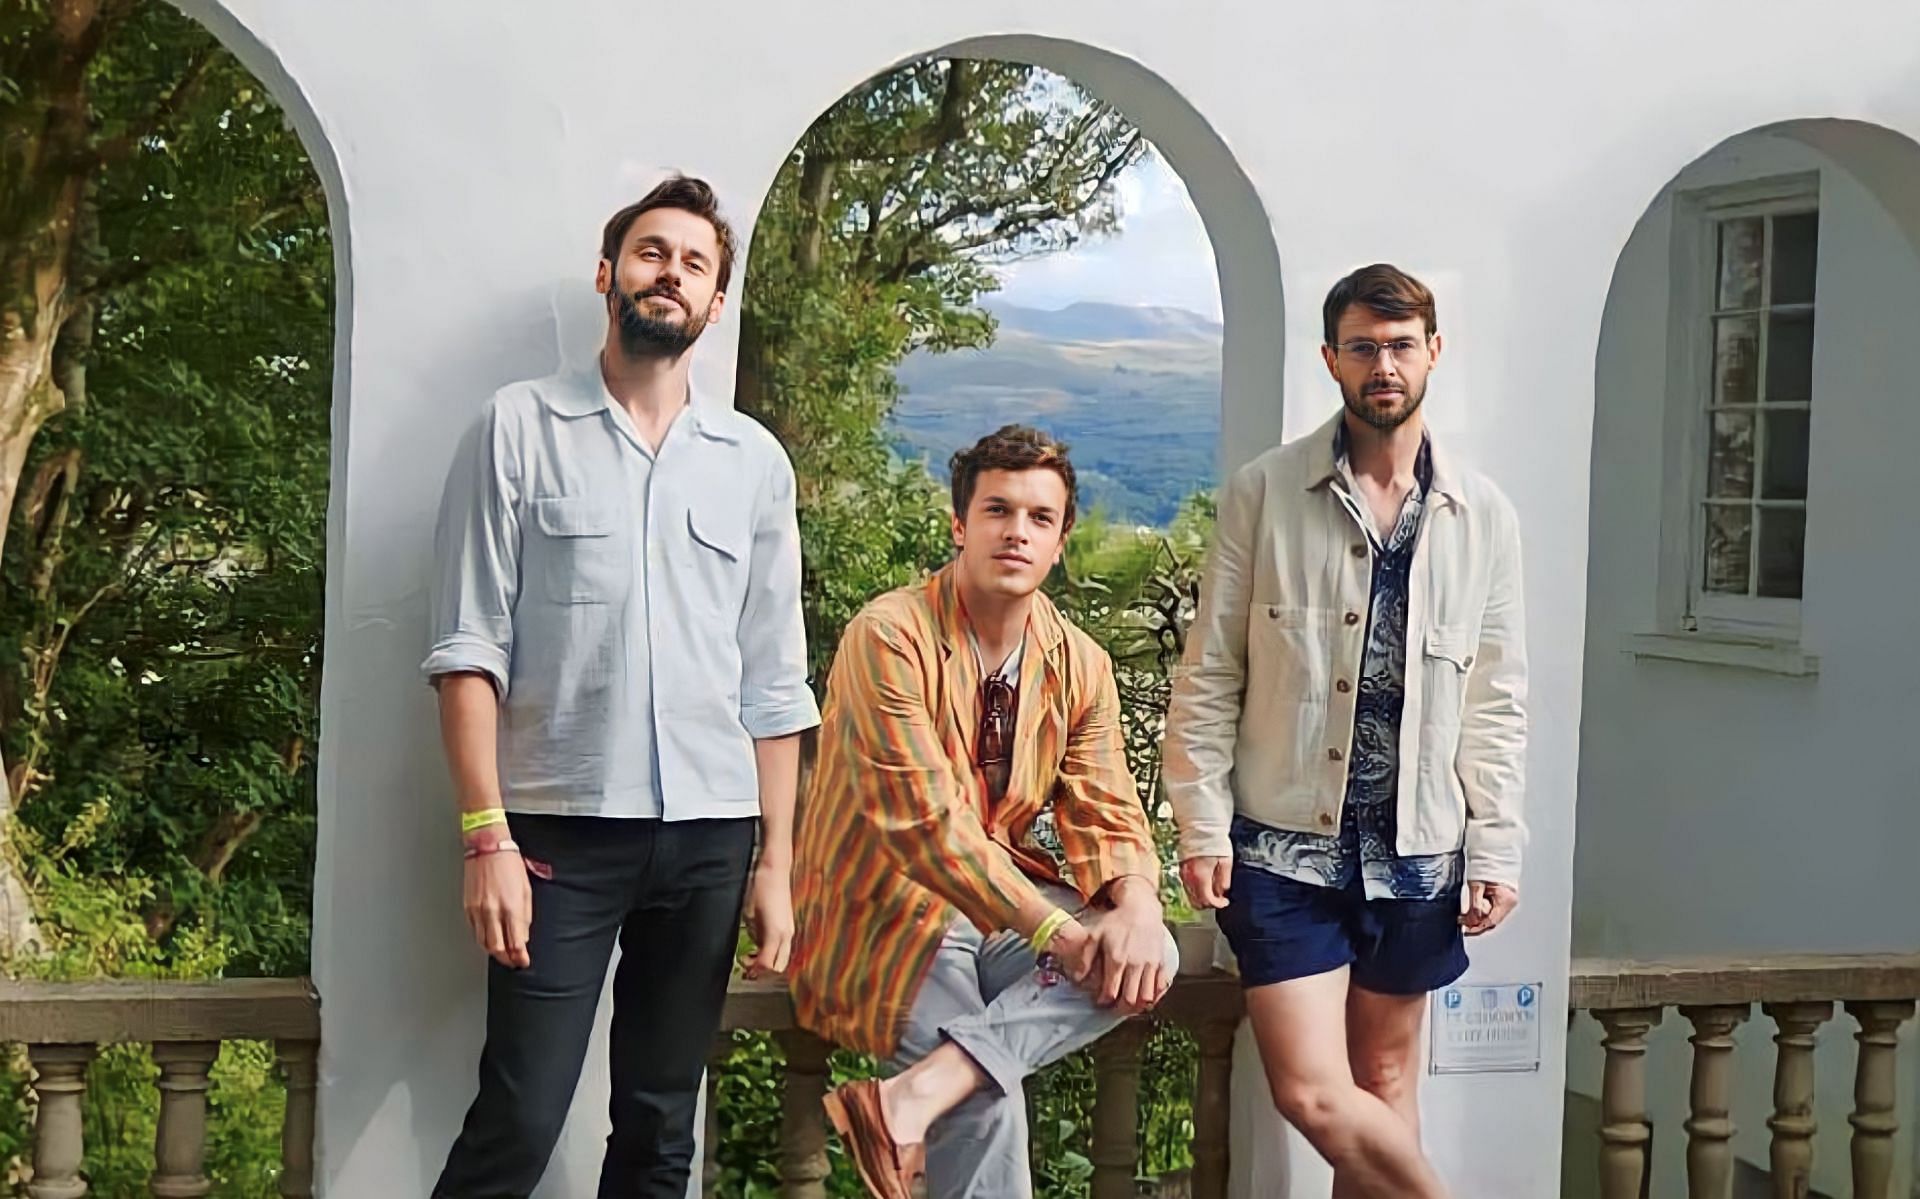 Friendly Fires